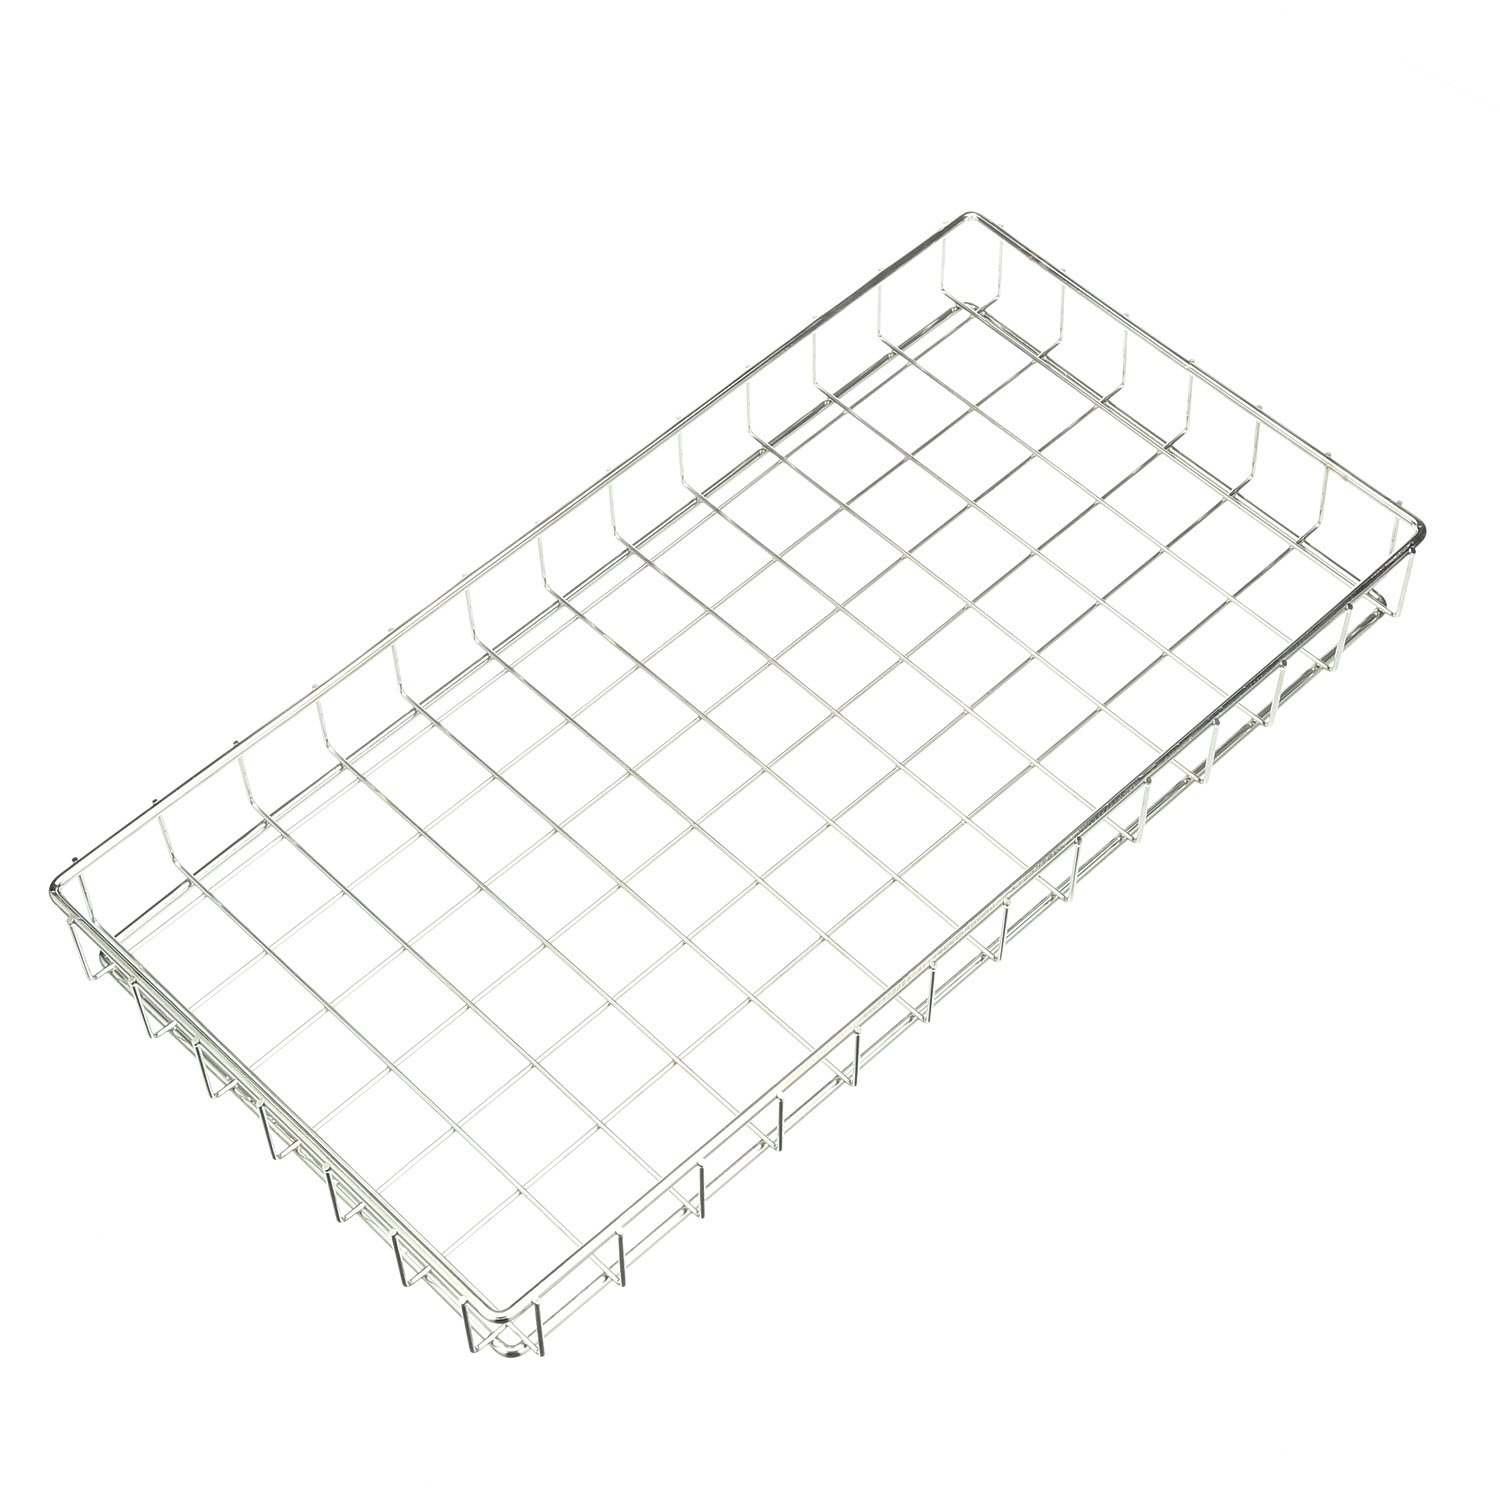 What are Steel Wire Lunch Baskets and Warming Trays?